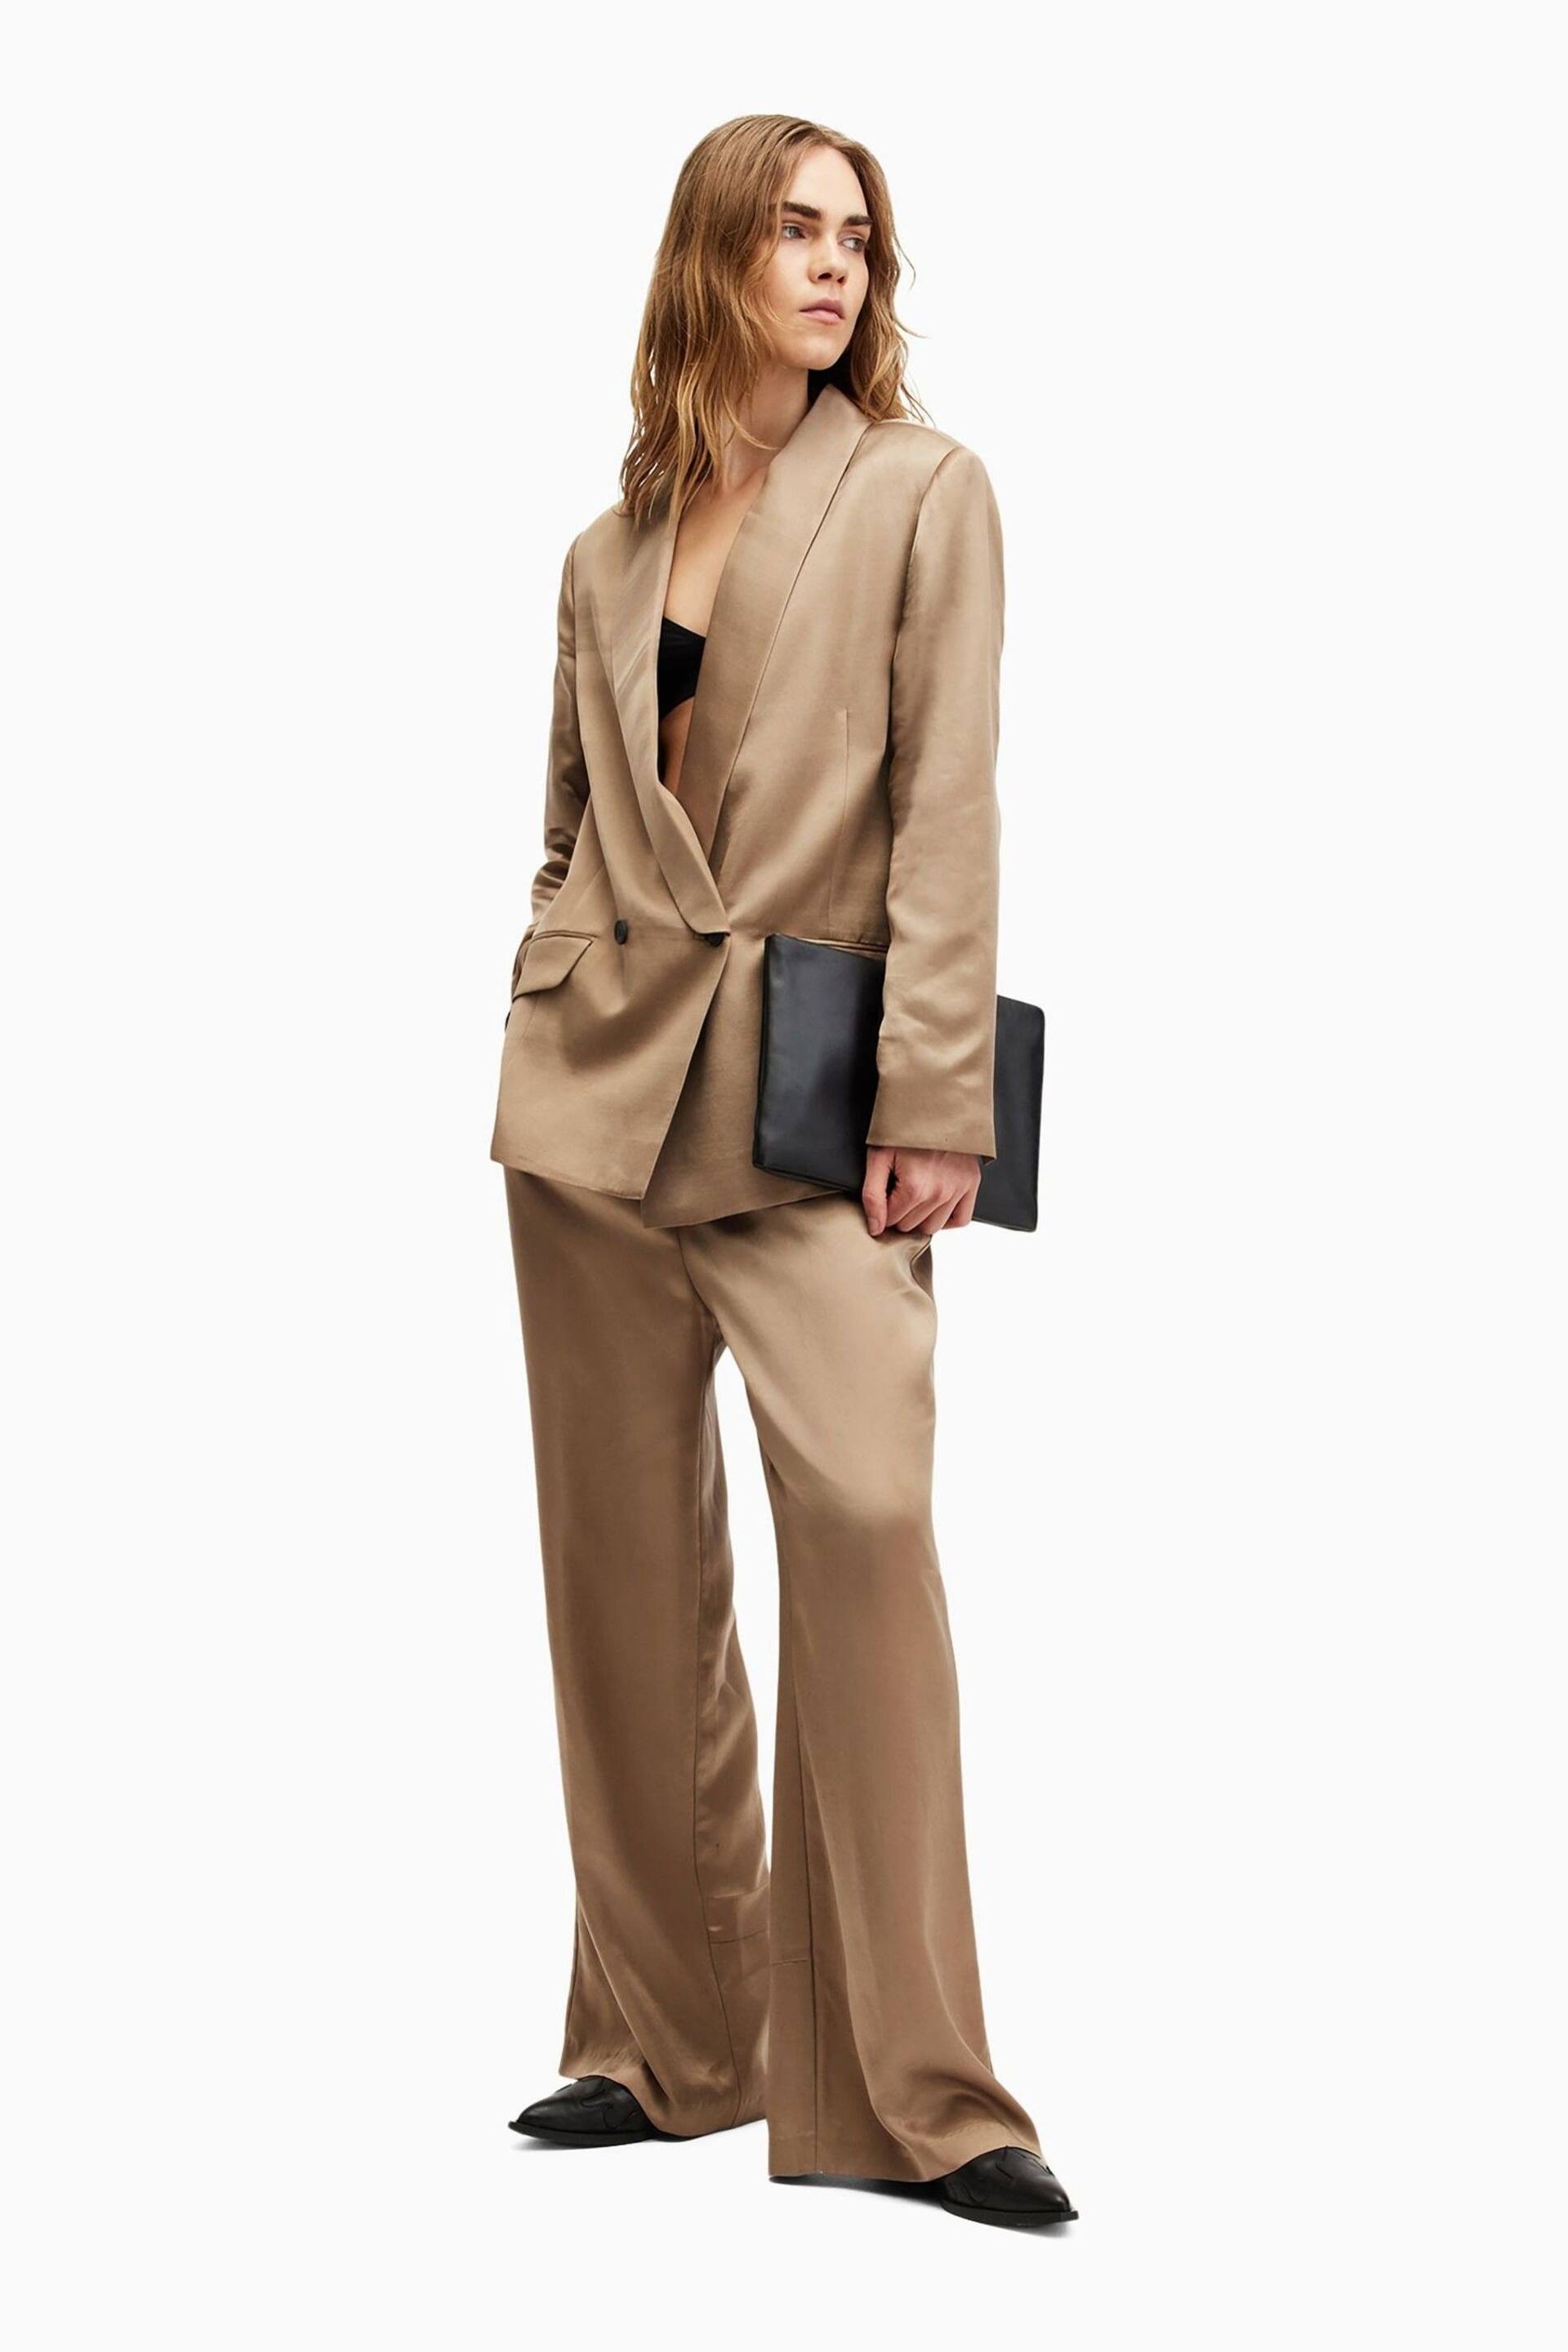 AllSaints Brown Goldie Trousers - Image 1 of 8